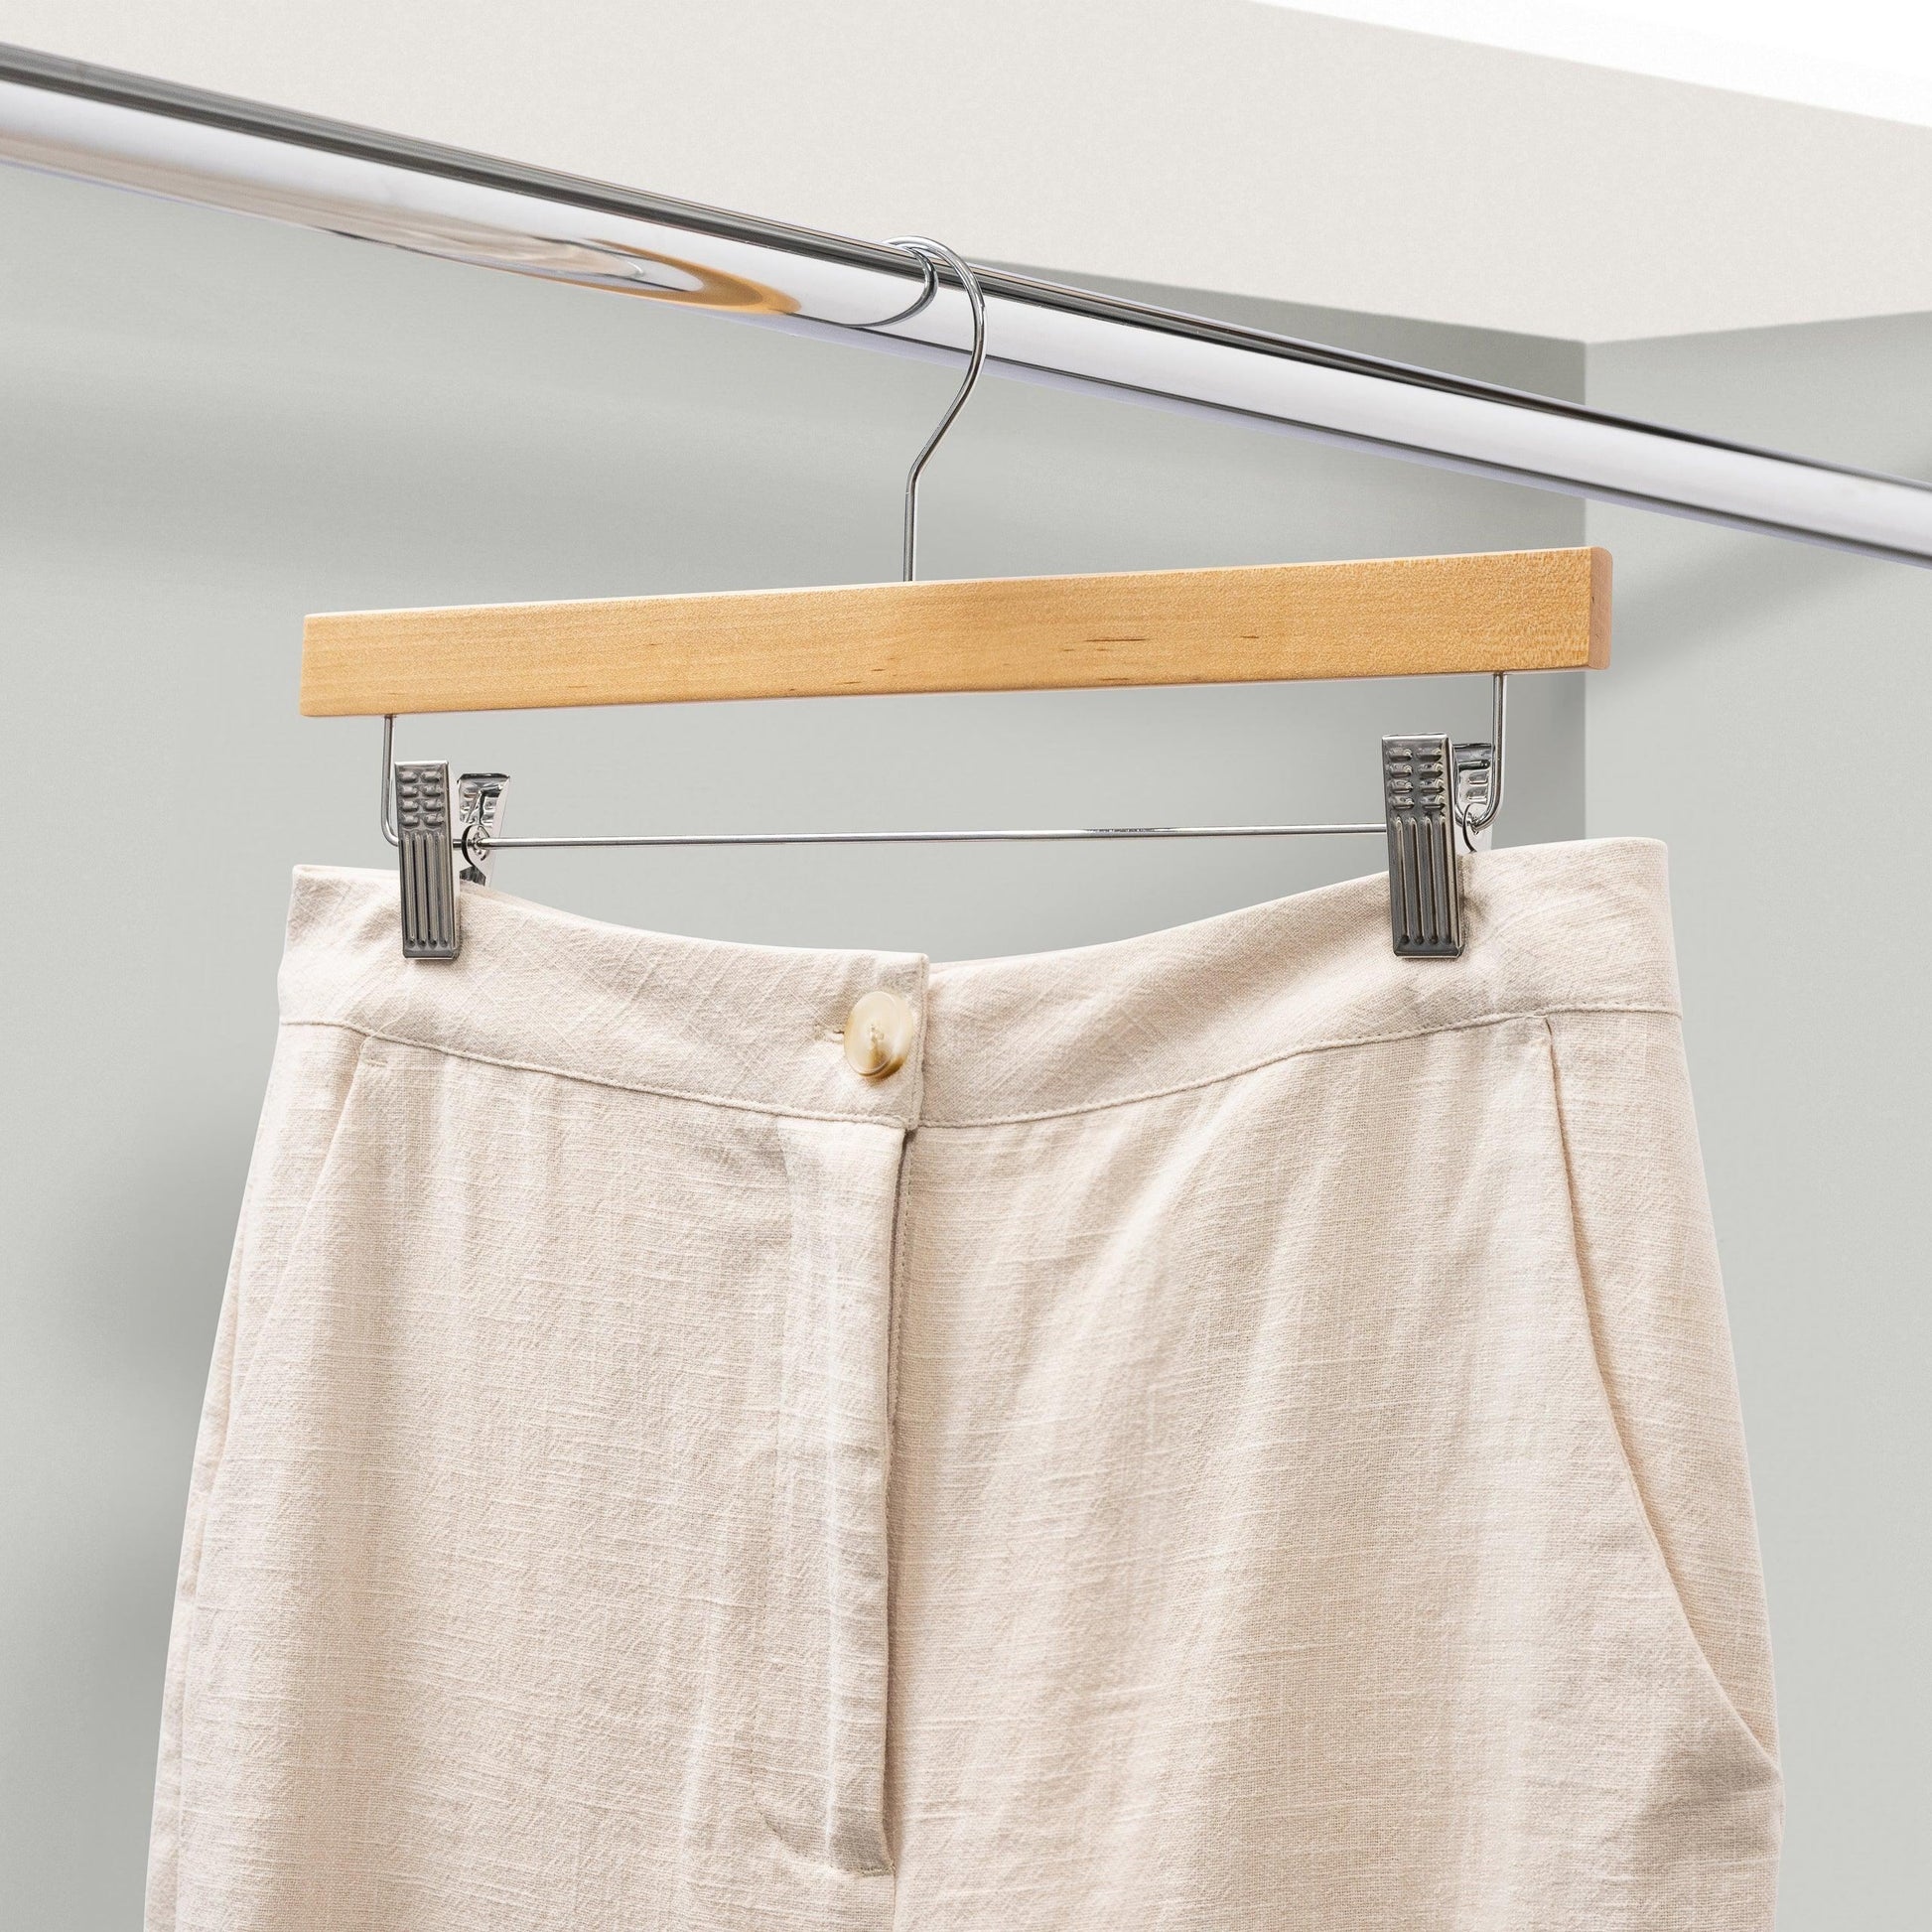 Natural Wood Hangers With Clips 35.5cm X 12mm Thick (Sold in 25/50/100) - Hangersforless